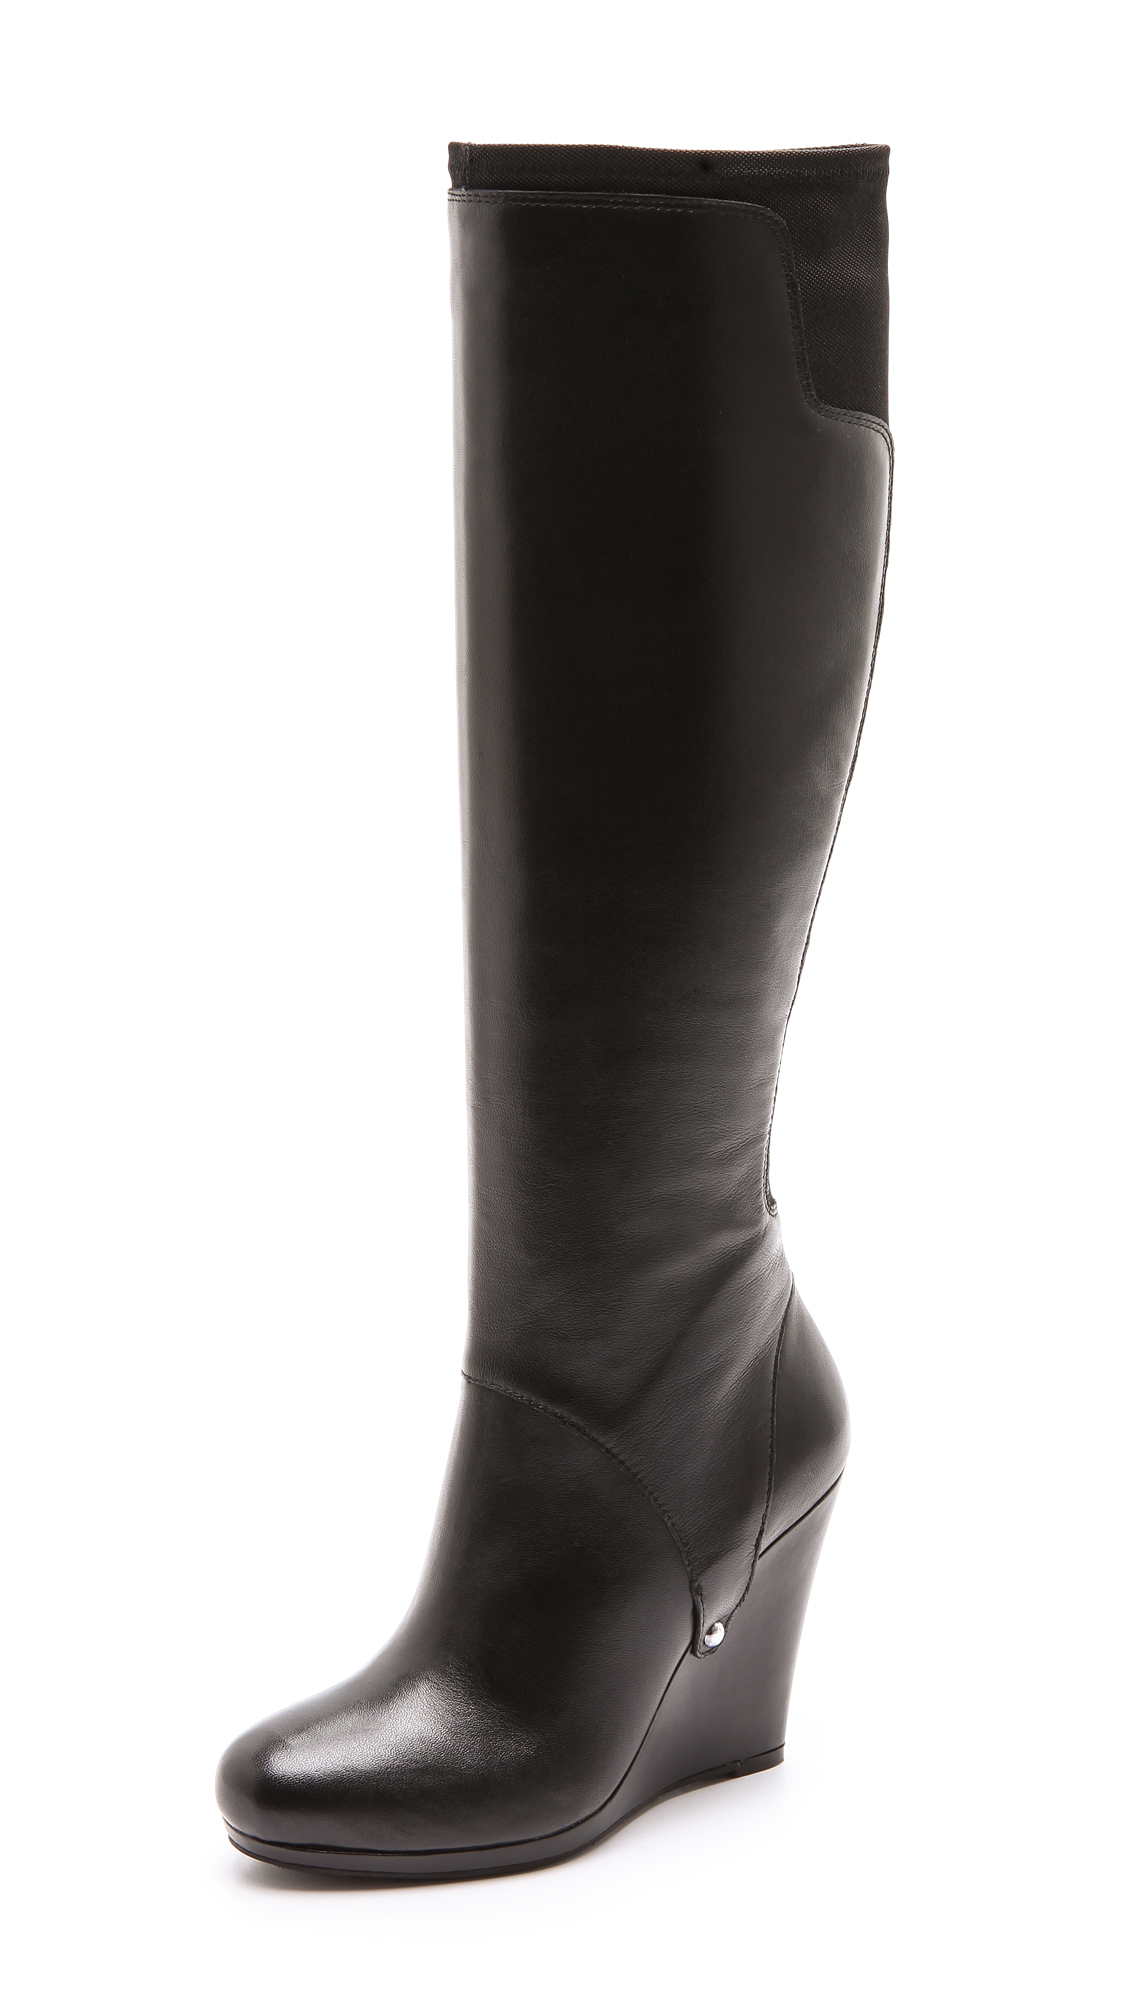 DKNY Nadia Stretch Back Wedge Boots in Black - Lyst